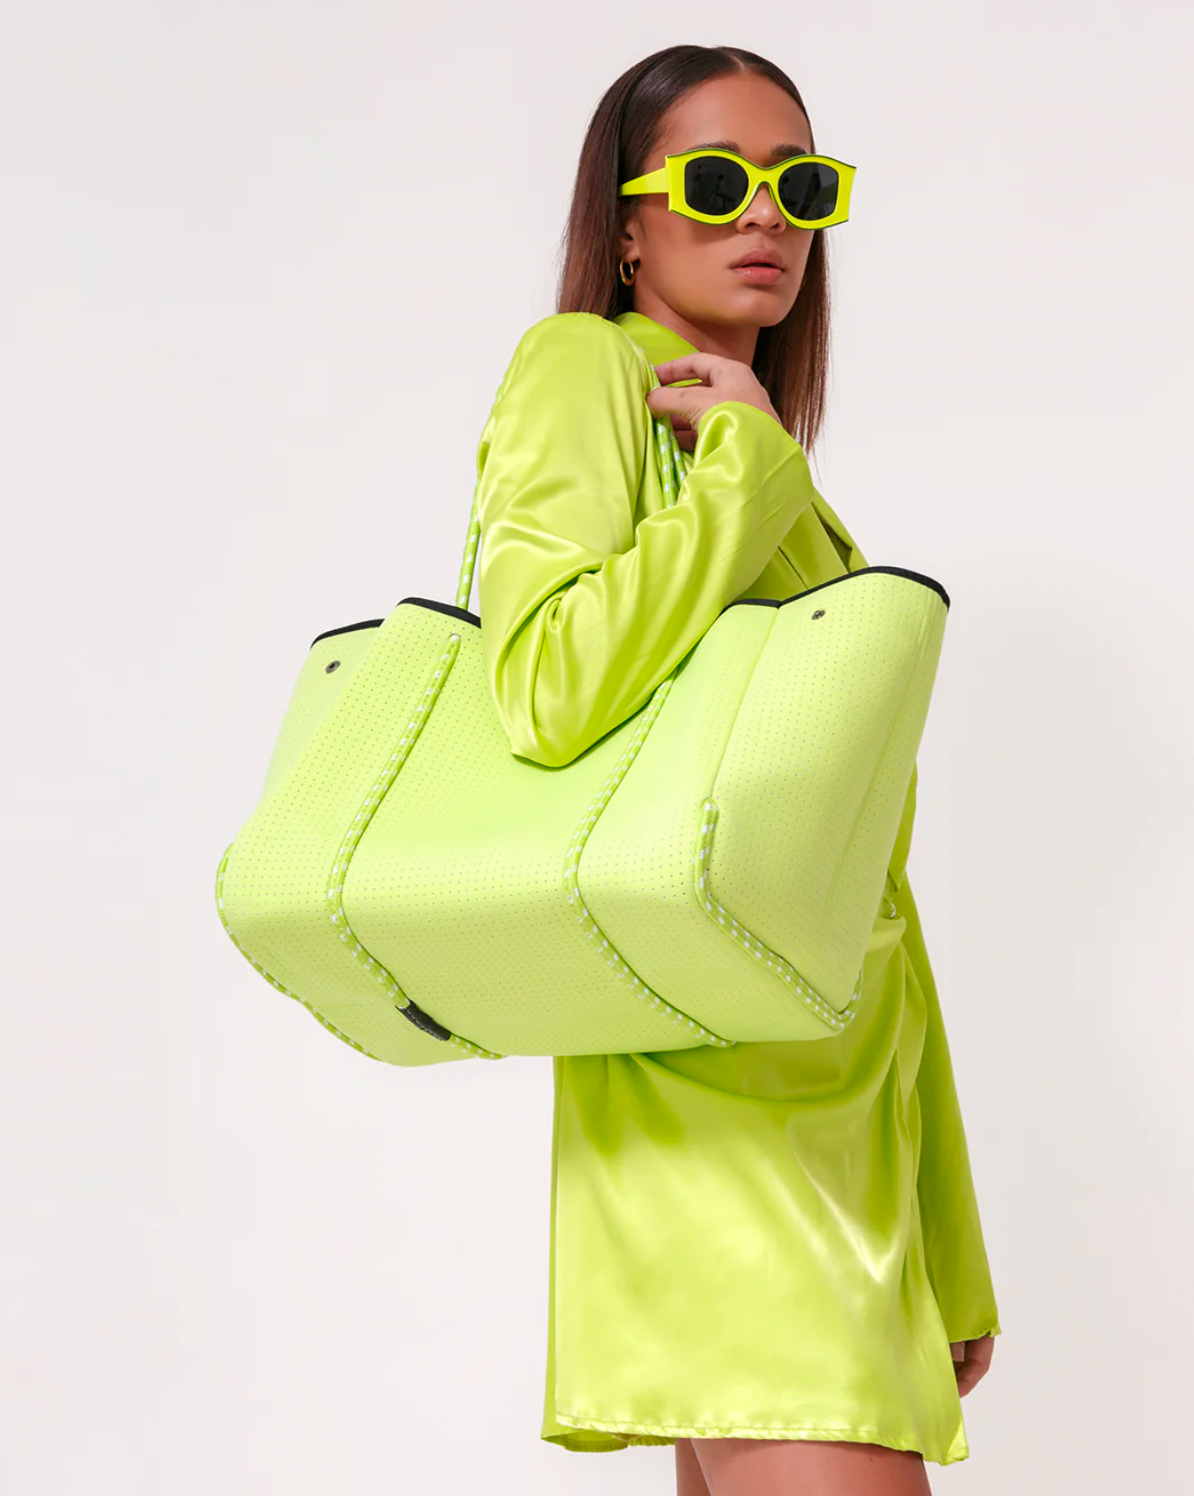 Model wearing POPUPS neon green everyday neoprene tote wearing neon green dress and glasses on a white background